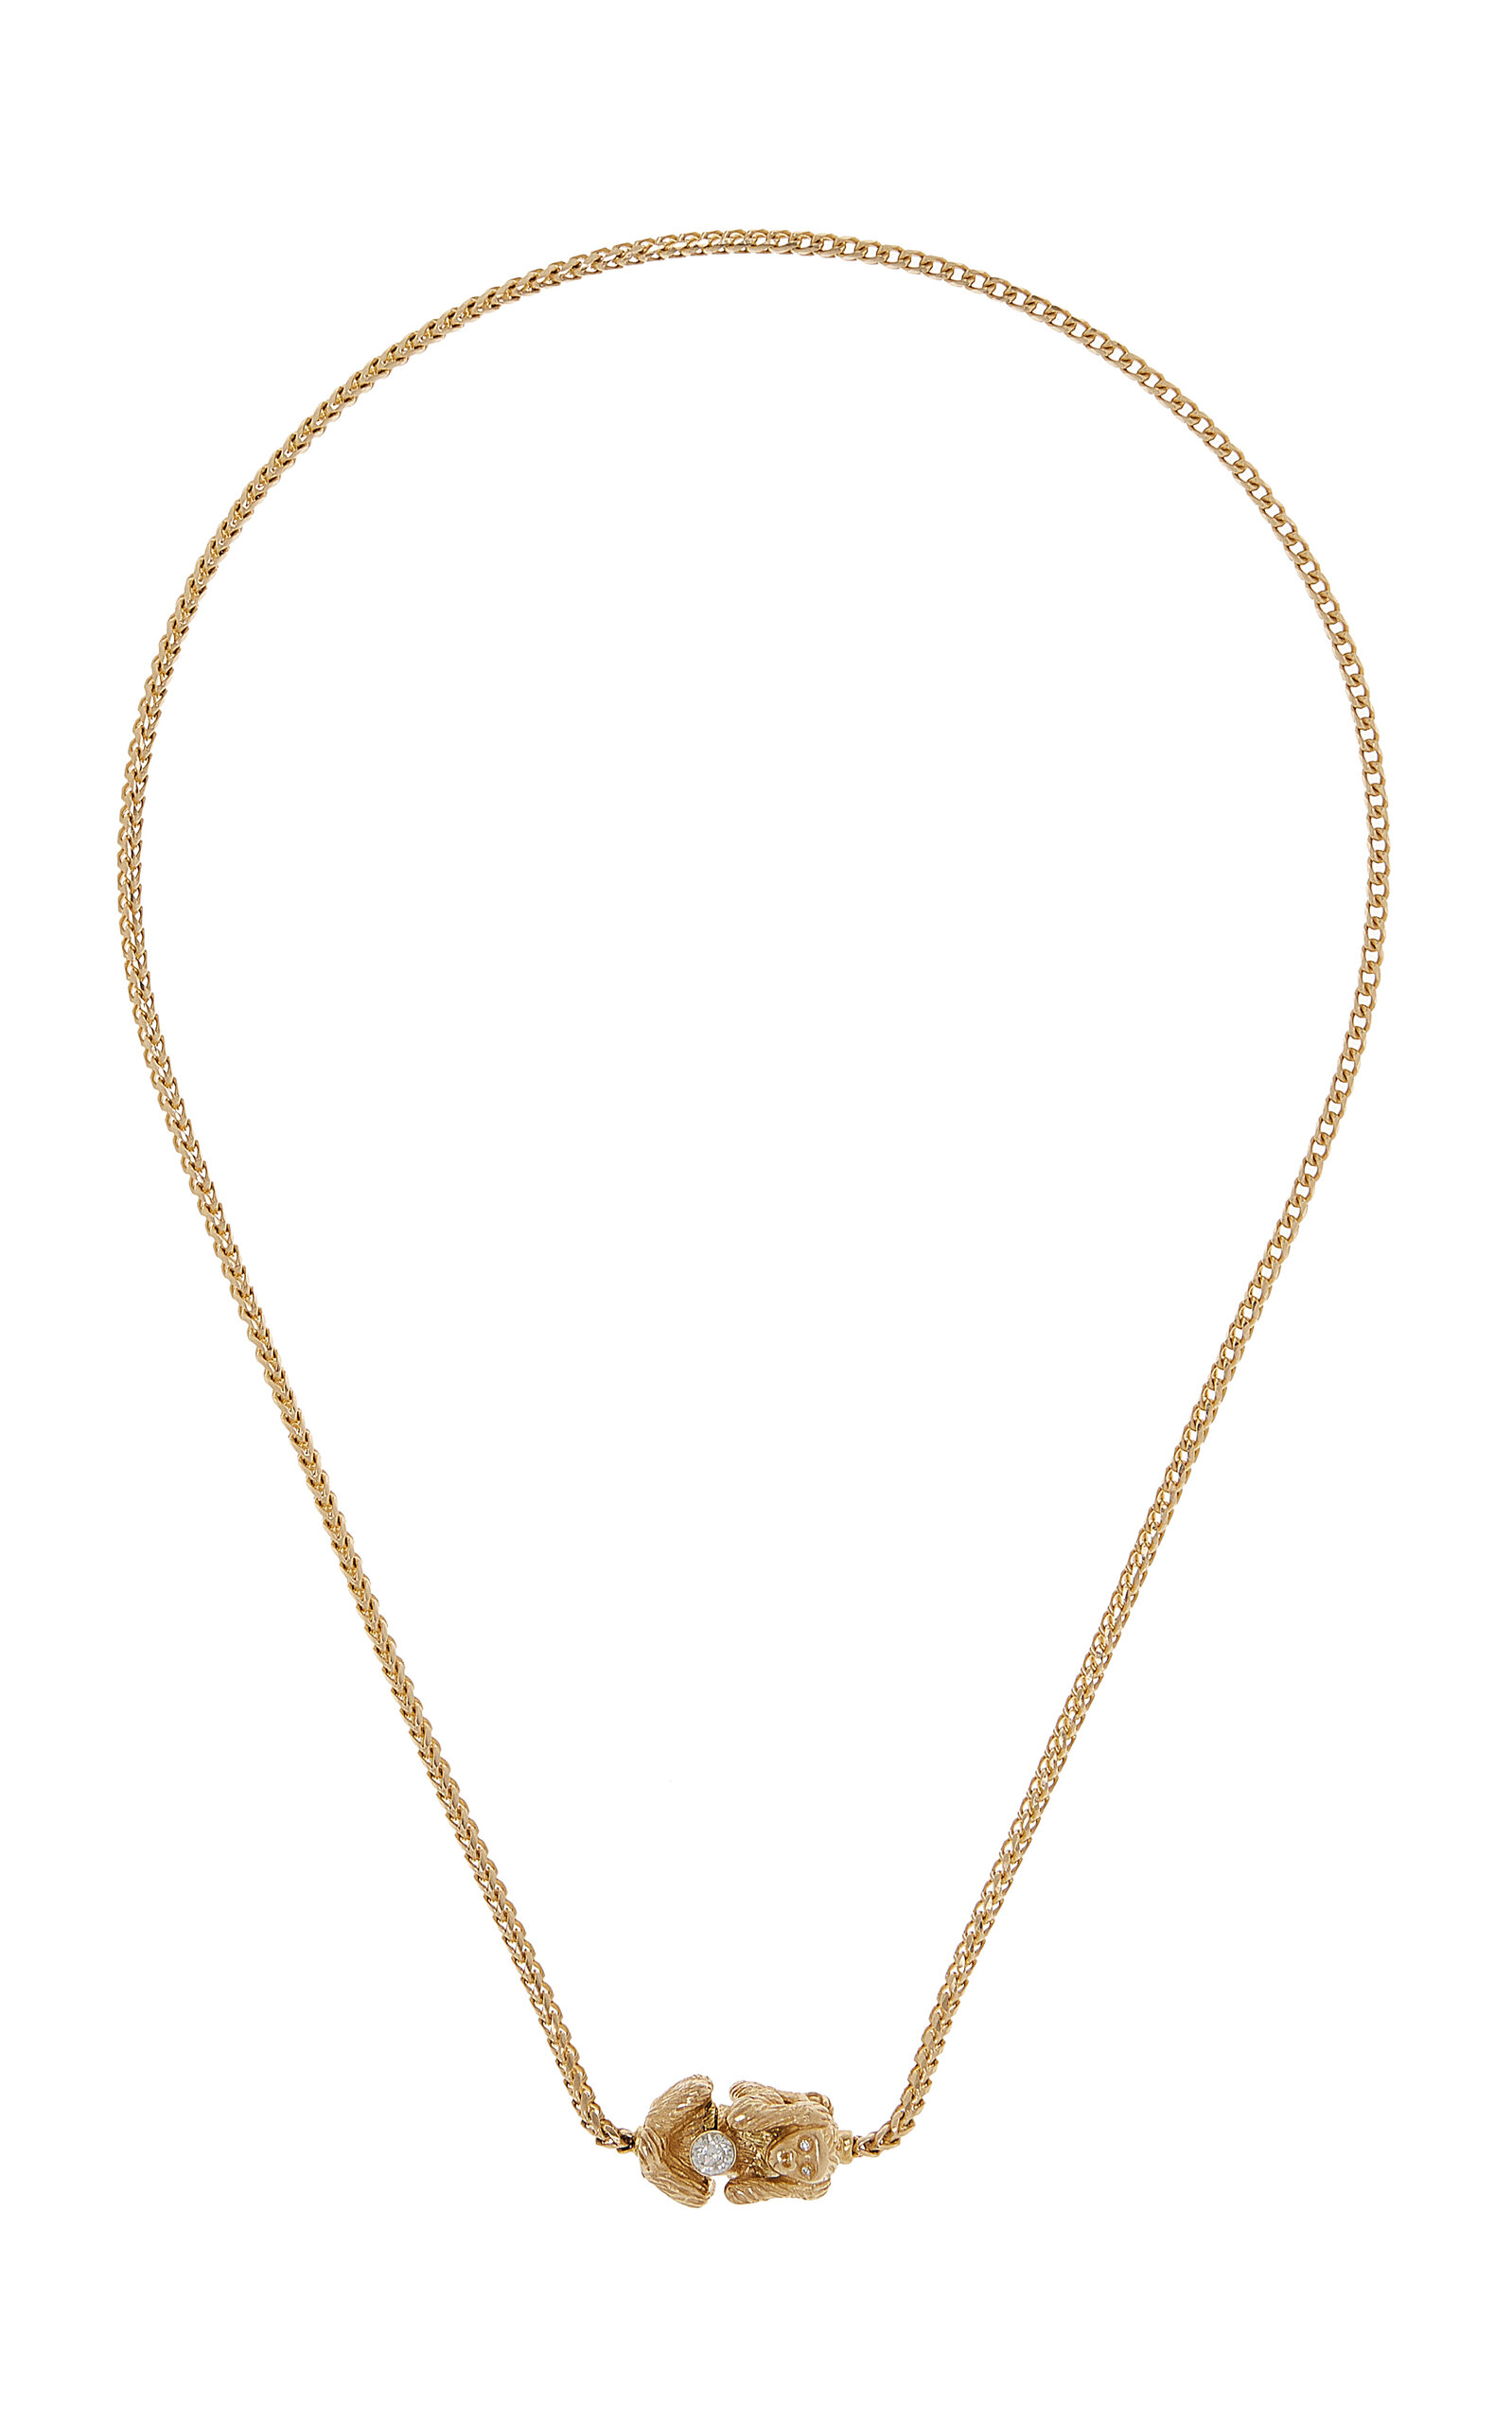 Wise Moneky 14K Yellow Gold Diamond Necklace